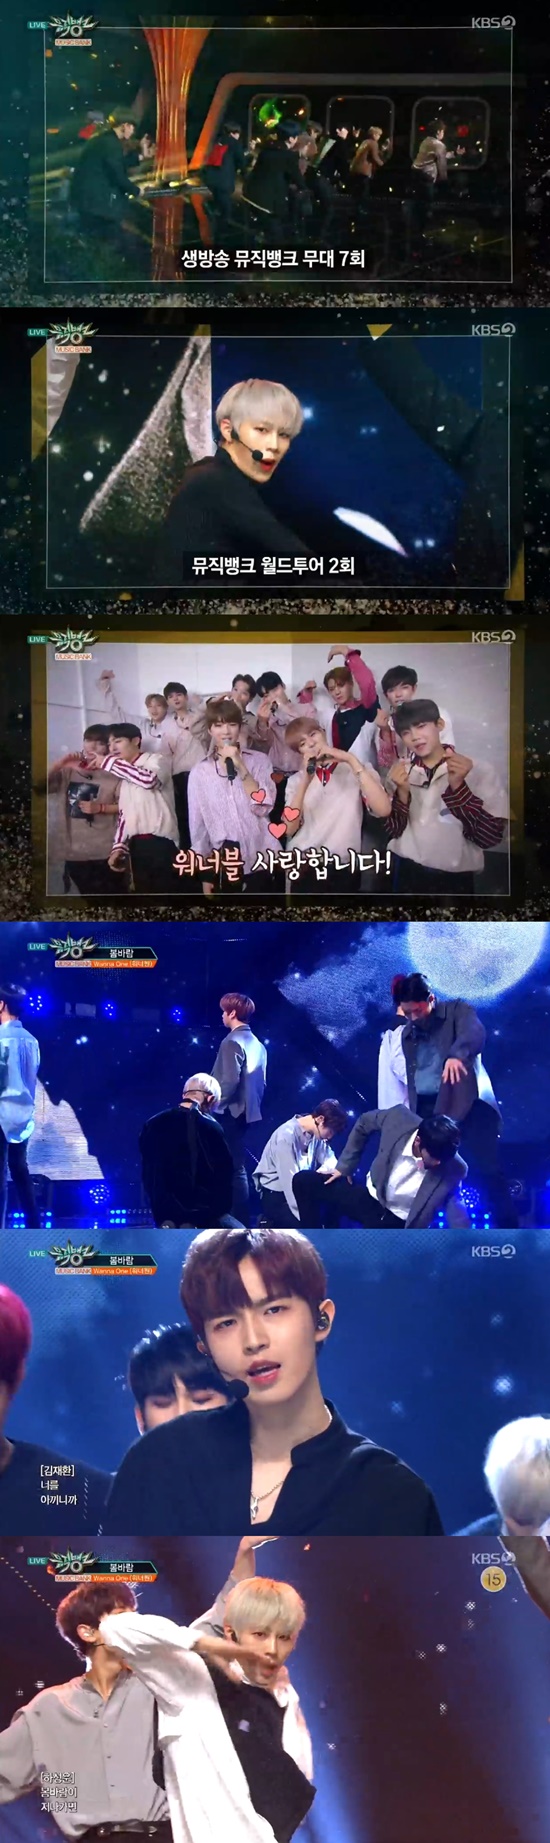 Group Wanna One presented Music Bank Goodbye stage.On KBS 2TV Music Bank broadcasted on the 7th, Wanna Ones Spring Breeze stage was broadcast.Wanna One was the last to perform on Music Bank, where fans greeted Wanna One with a louder shout than ever.Wanna One was also cheered for his dance as well as his Spring Breeze rousing. / Photo = KBS 2TV